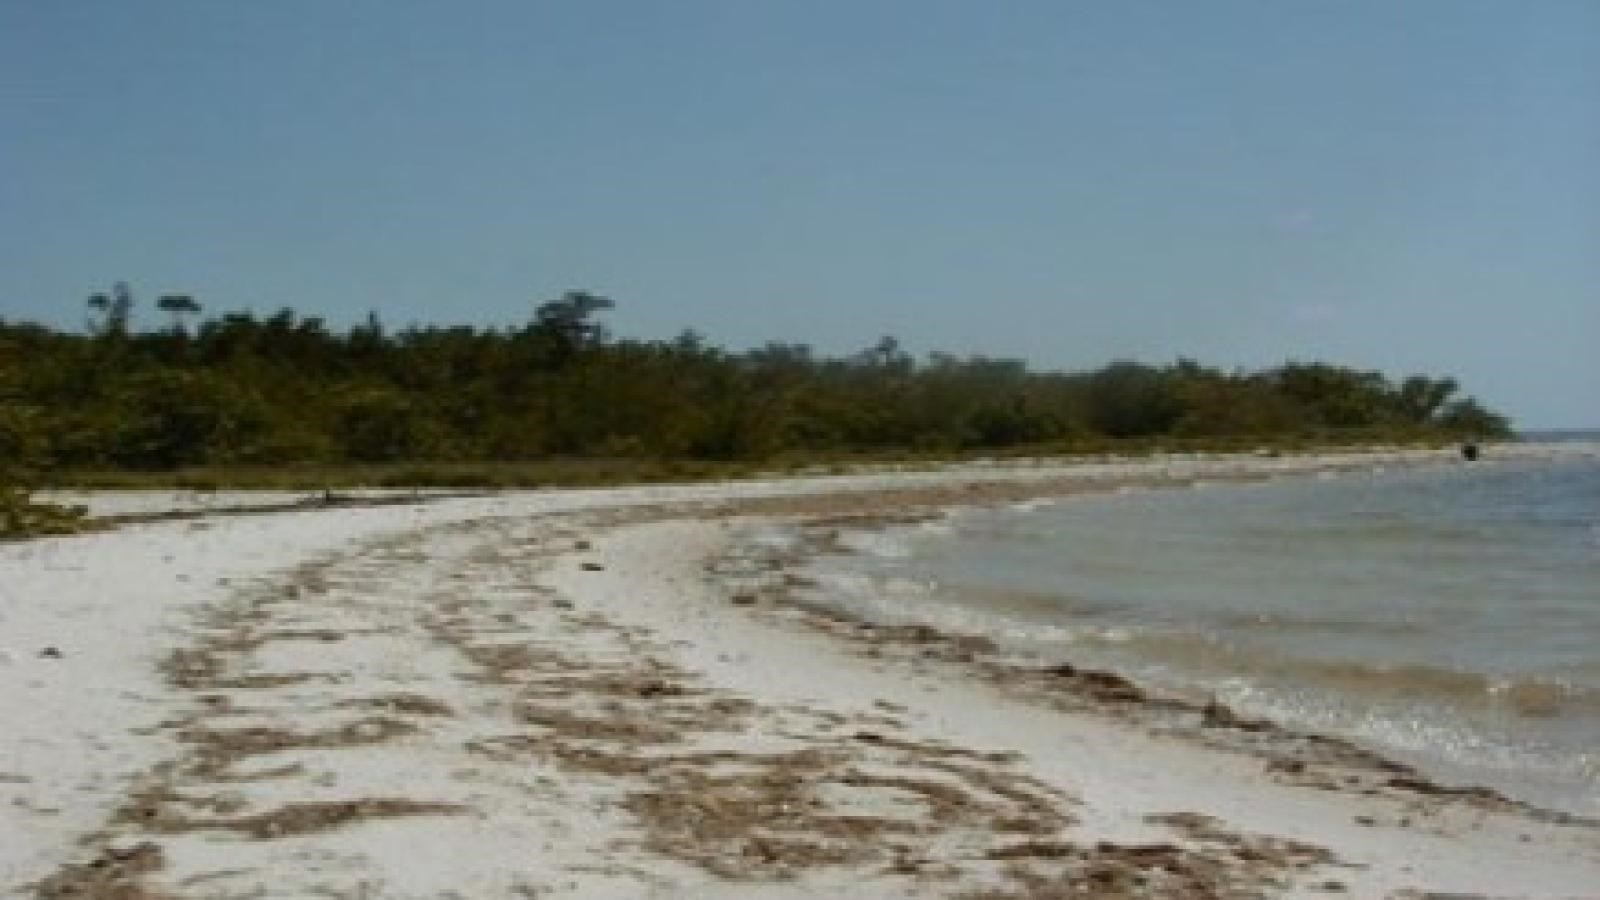 A white curved sandy beach with shells and seaweed. blue waters and green vegetation